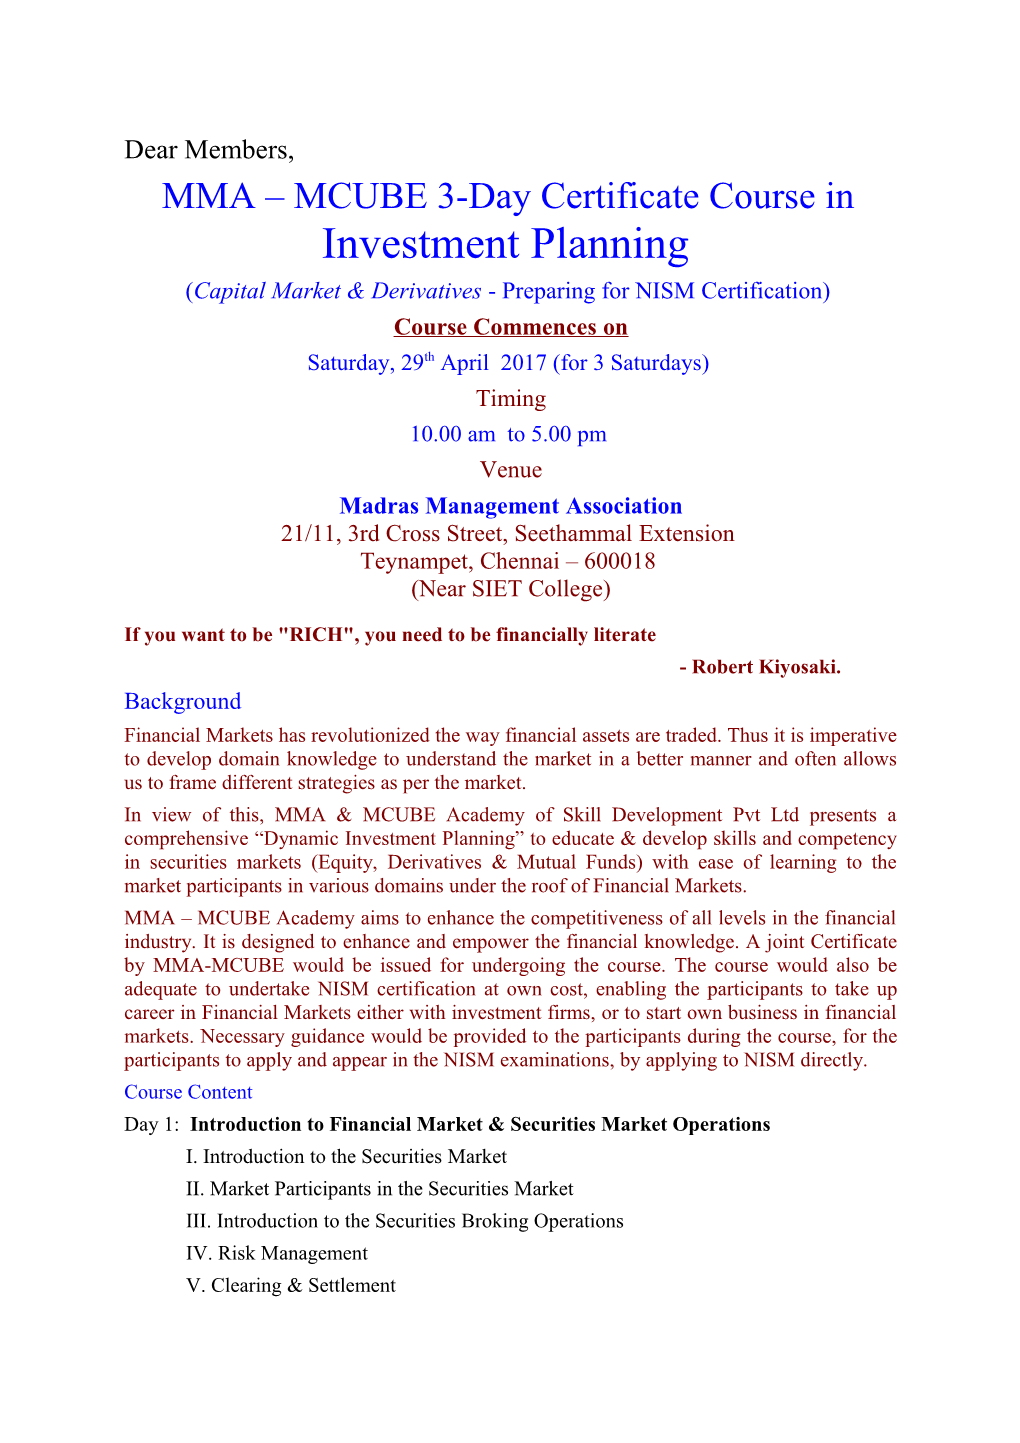 MMA MCUBE 3-Day Certificate Course in Investment Planning